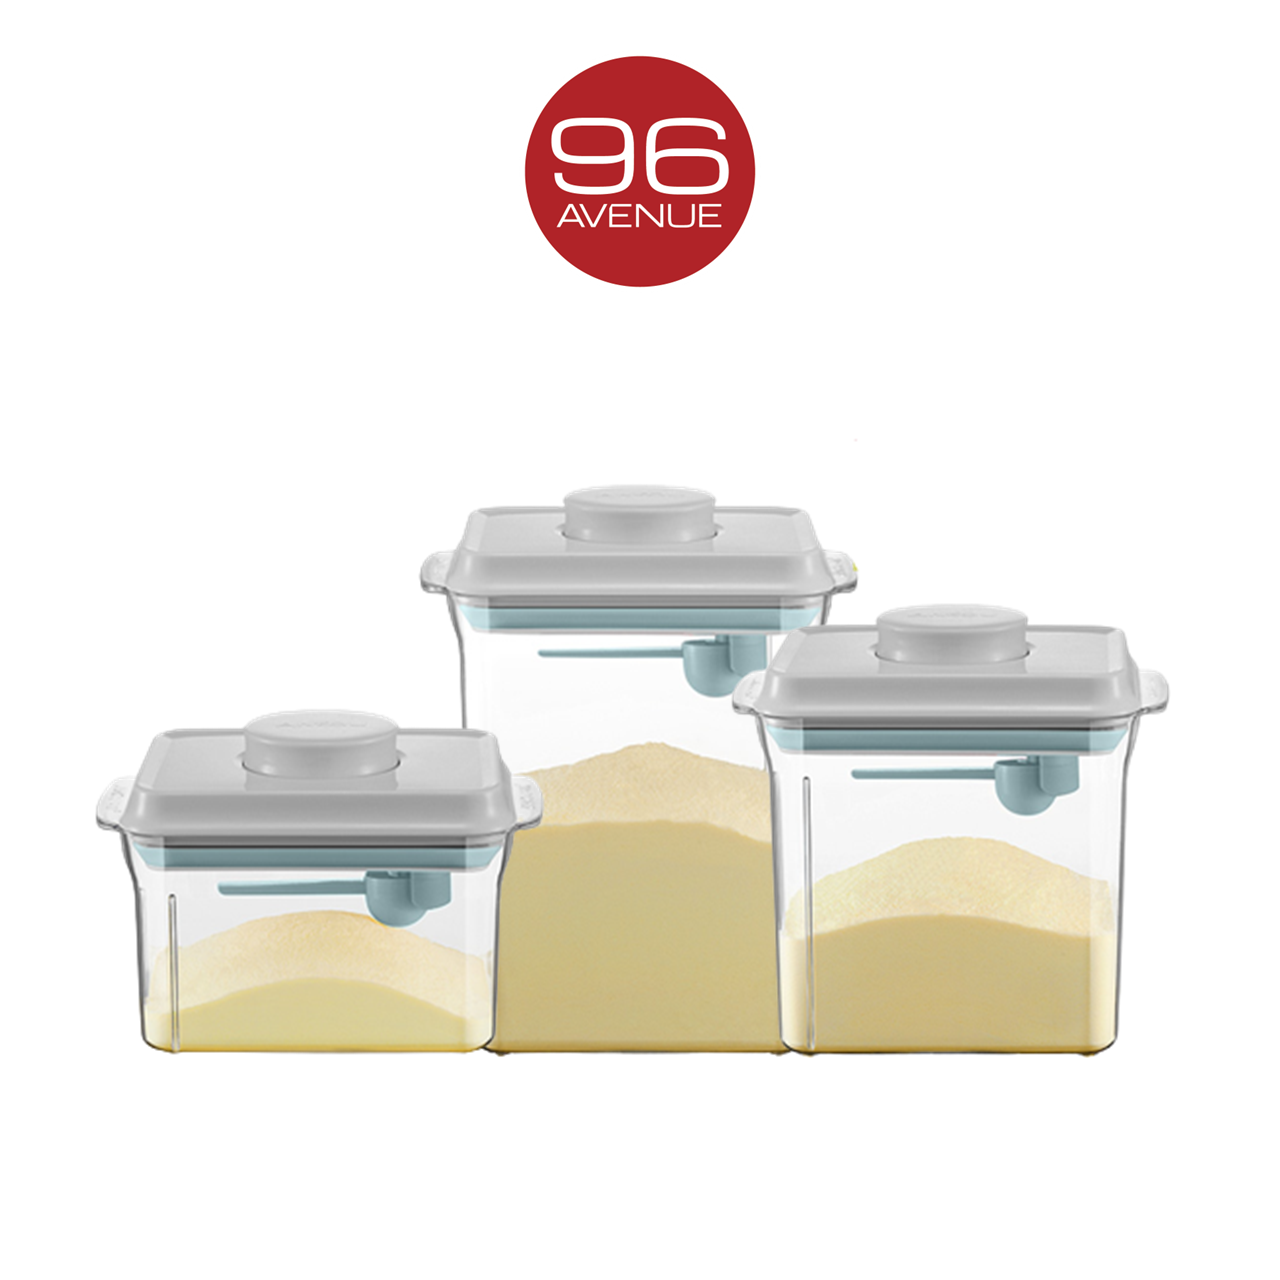 ANKOU AirTight Milk Powder Container with Scraper - Rectangle Clear 1000ml